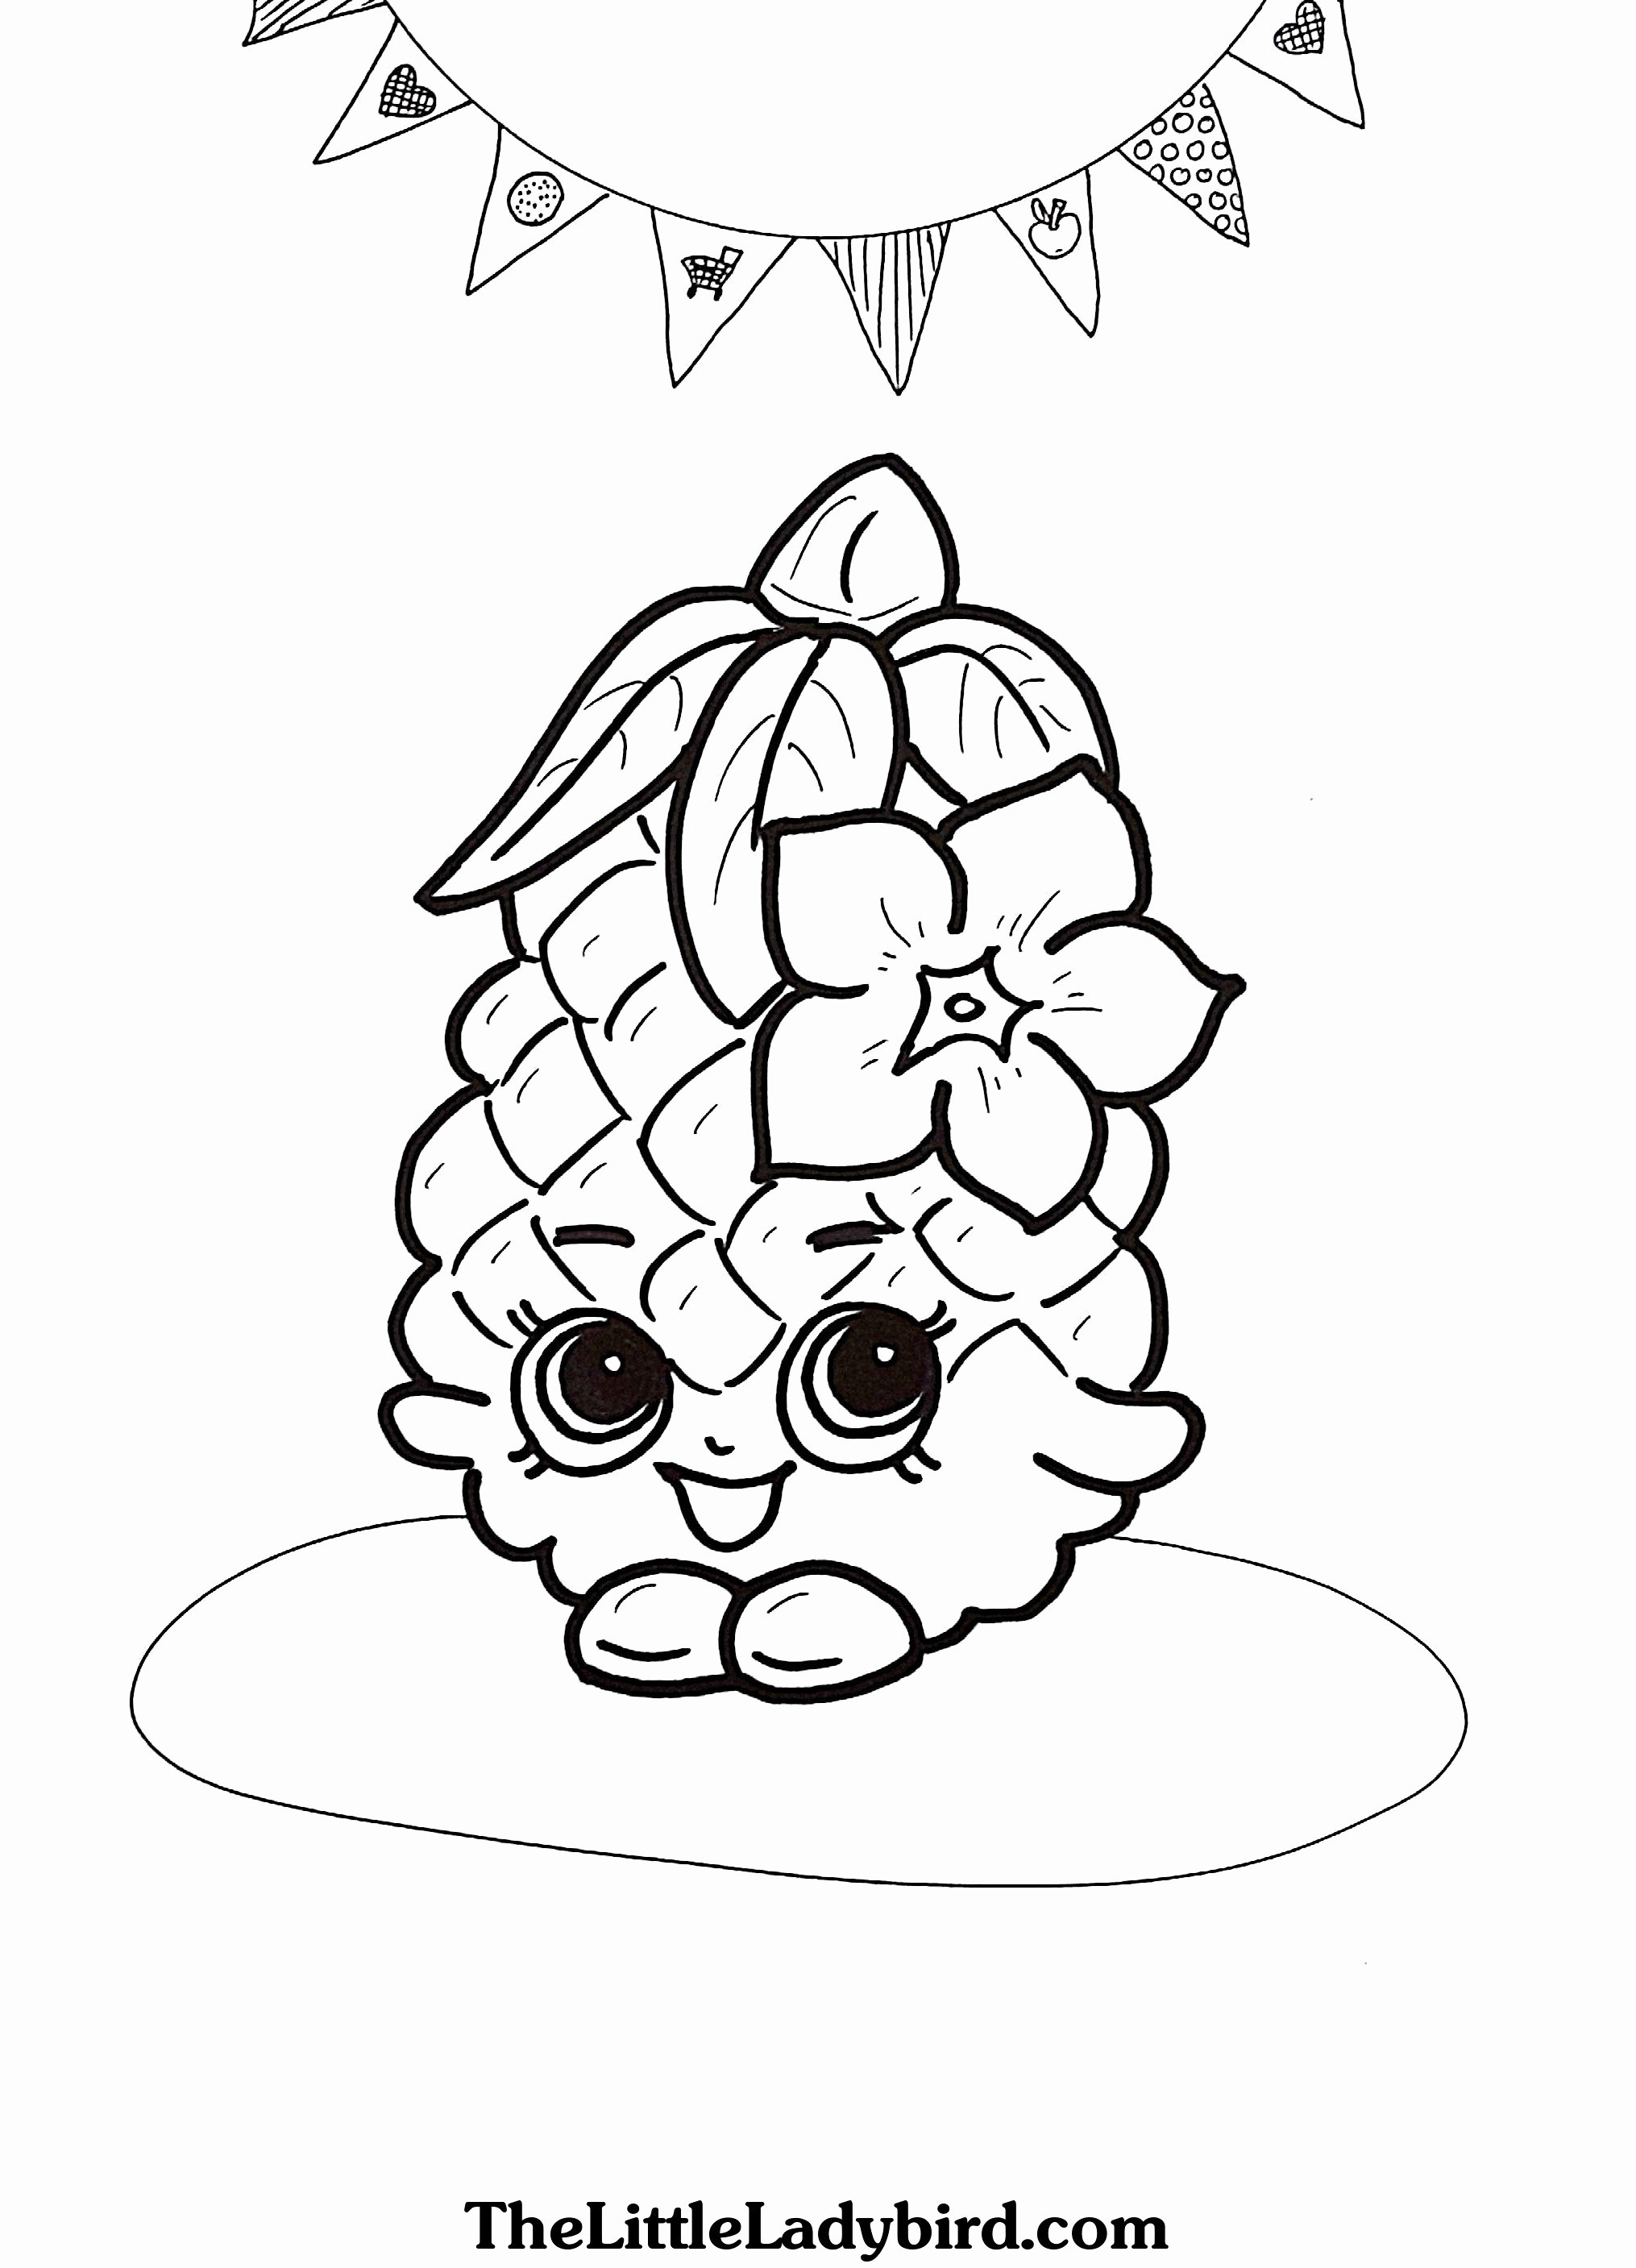 28 Cute Flower Vase Photos 2024 free download flower vase photos of pretty coloring pages of flowers fresh best vases flower vase with regard to best vases flower vase coloring page pages flowers in a top i 0d